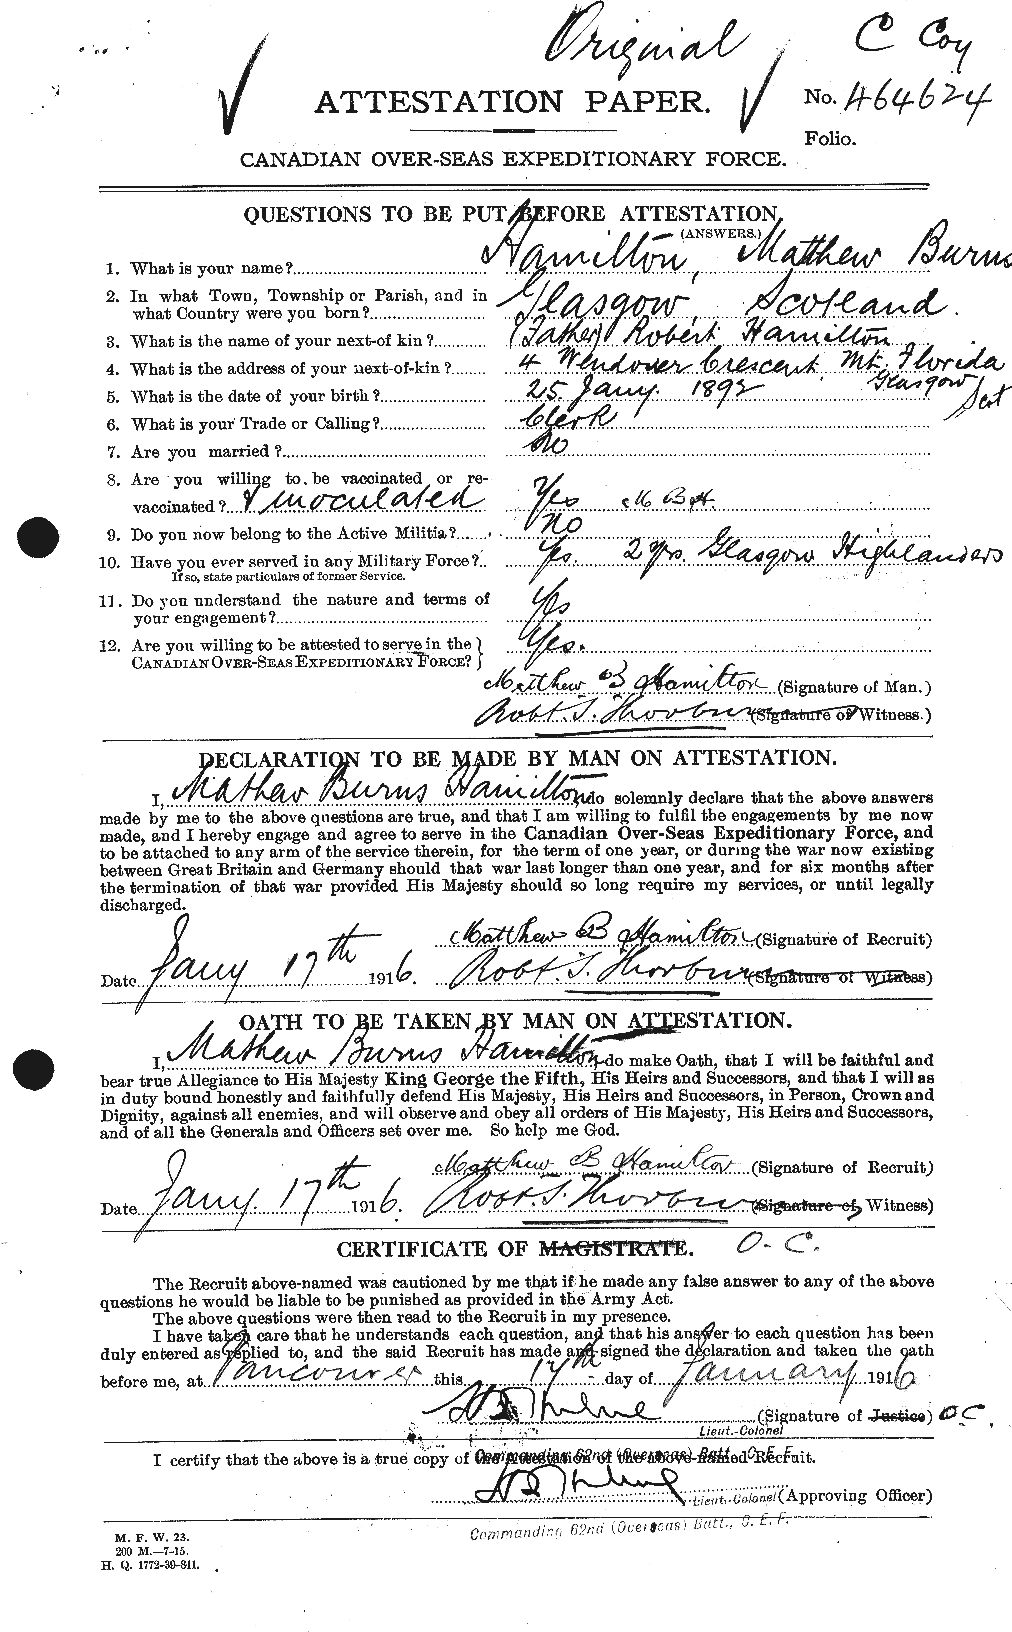 Personnel Records of the First World War - CEF 373177a